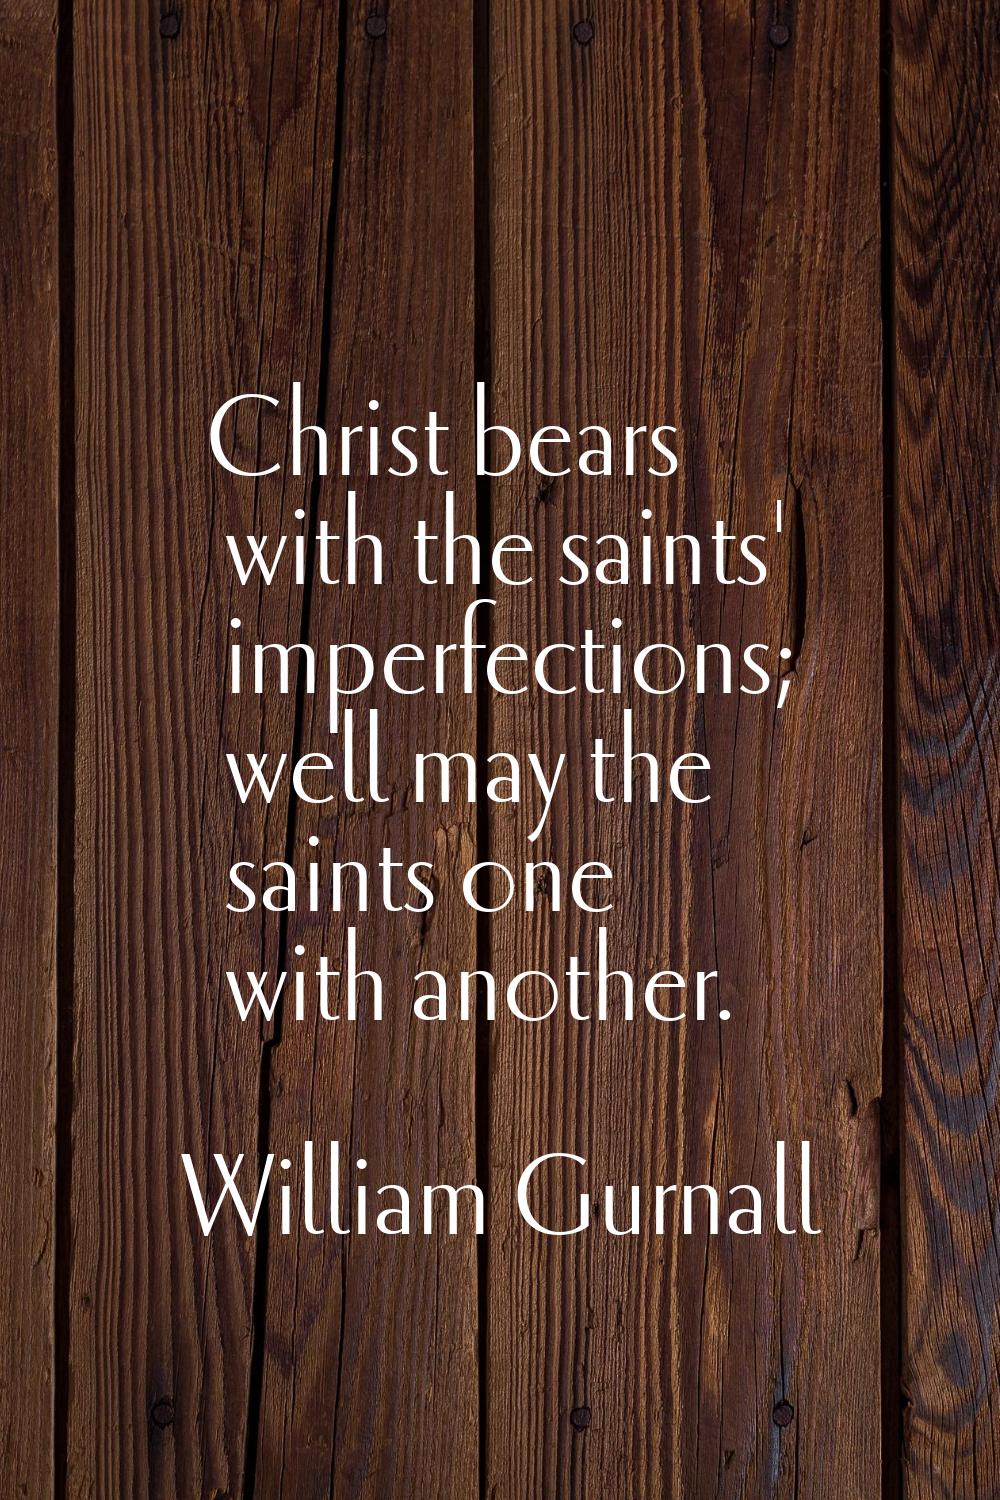 Christ bears with the saints' imperfections; well may the saints one with another.